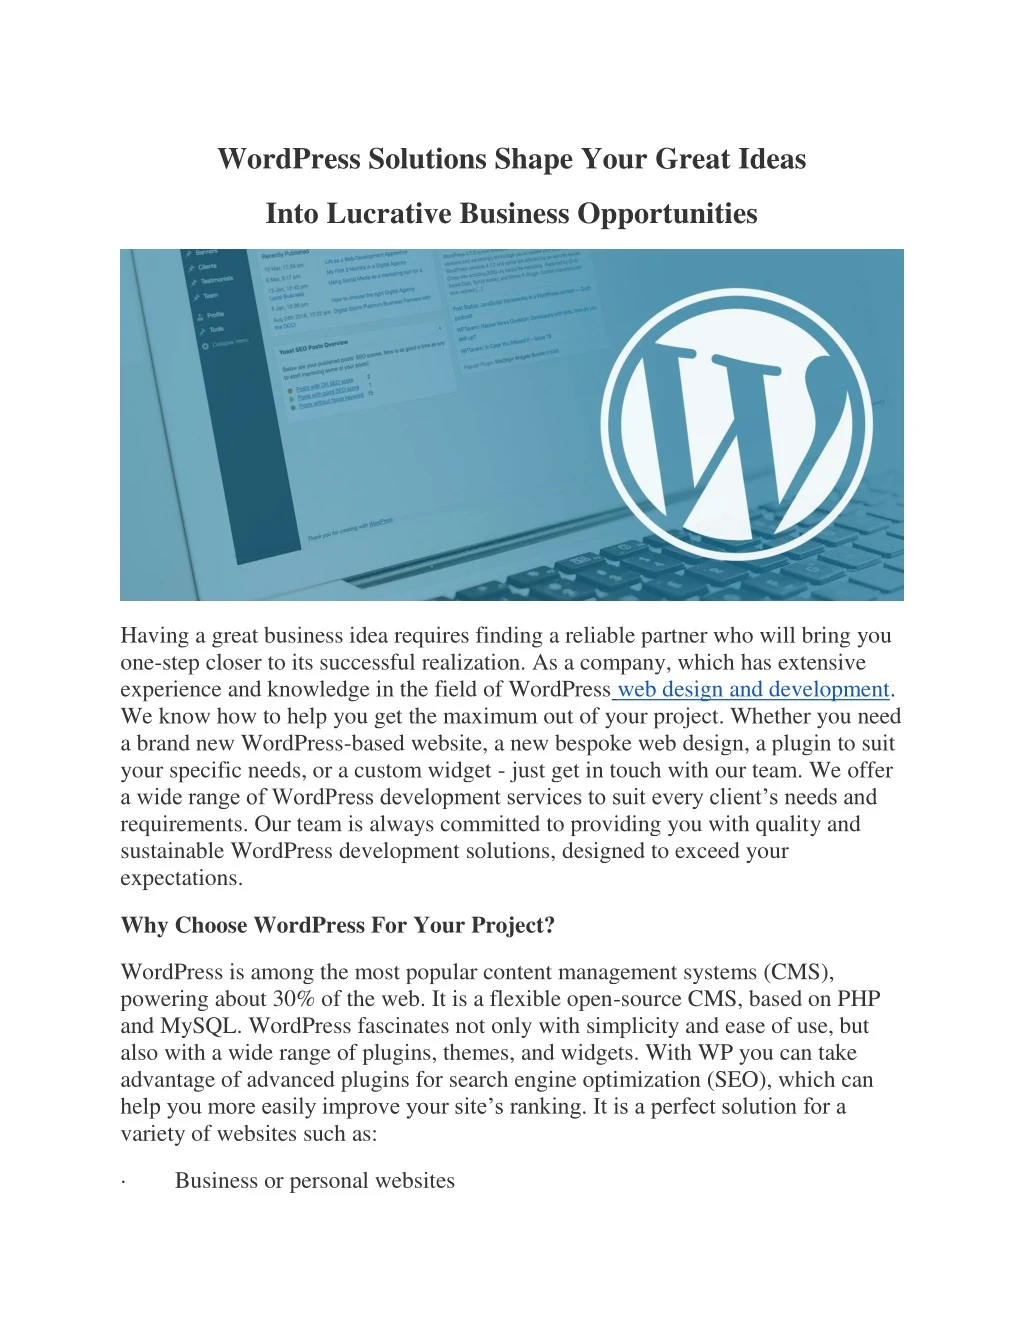 wordpress solutions shape your great ideas